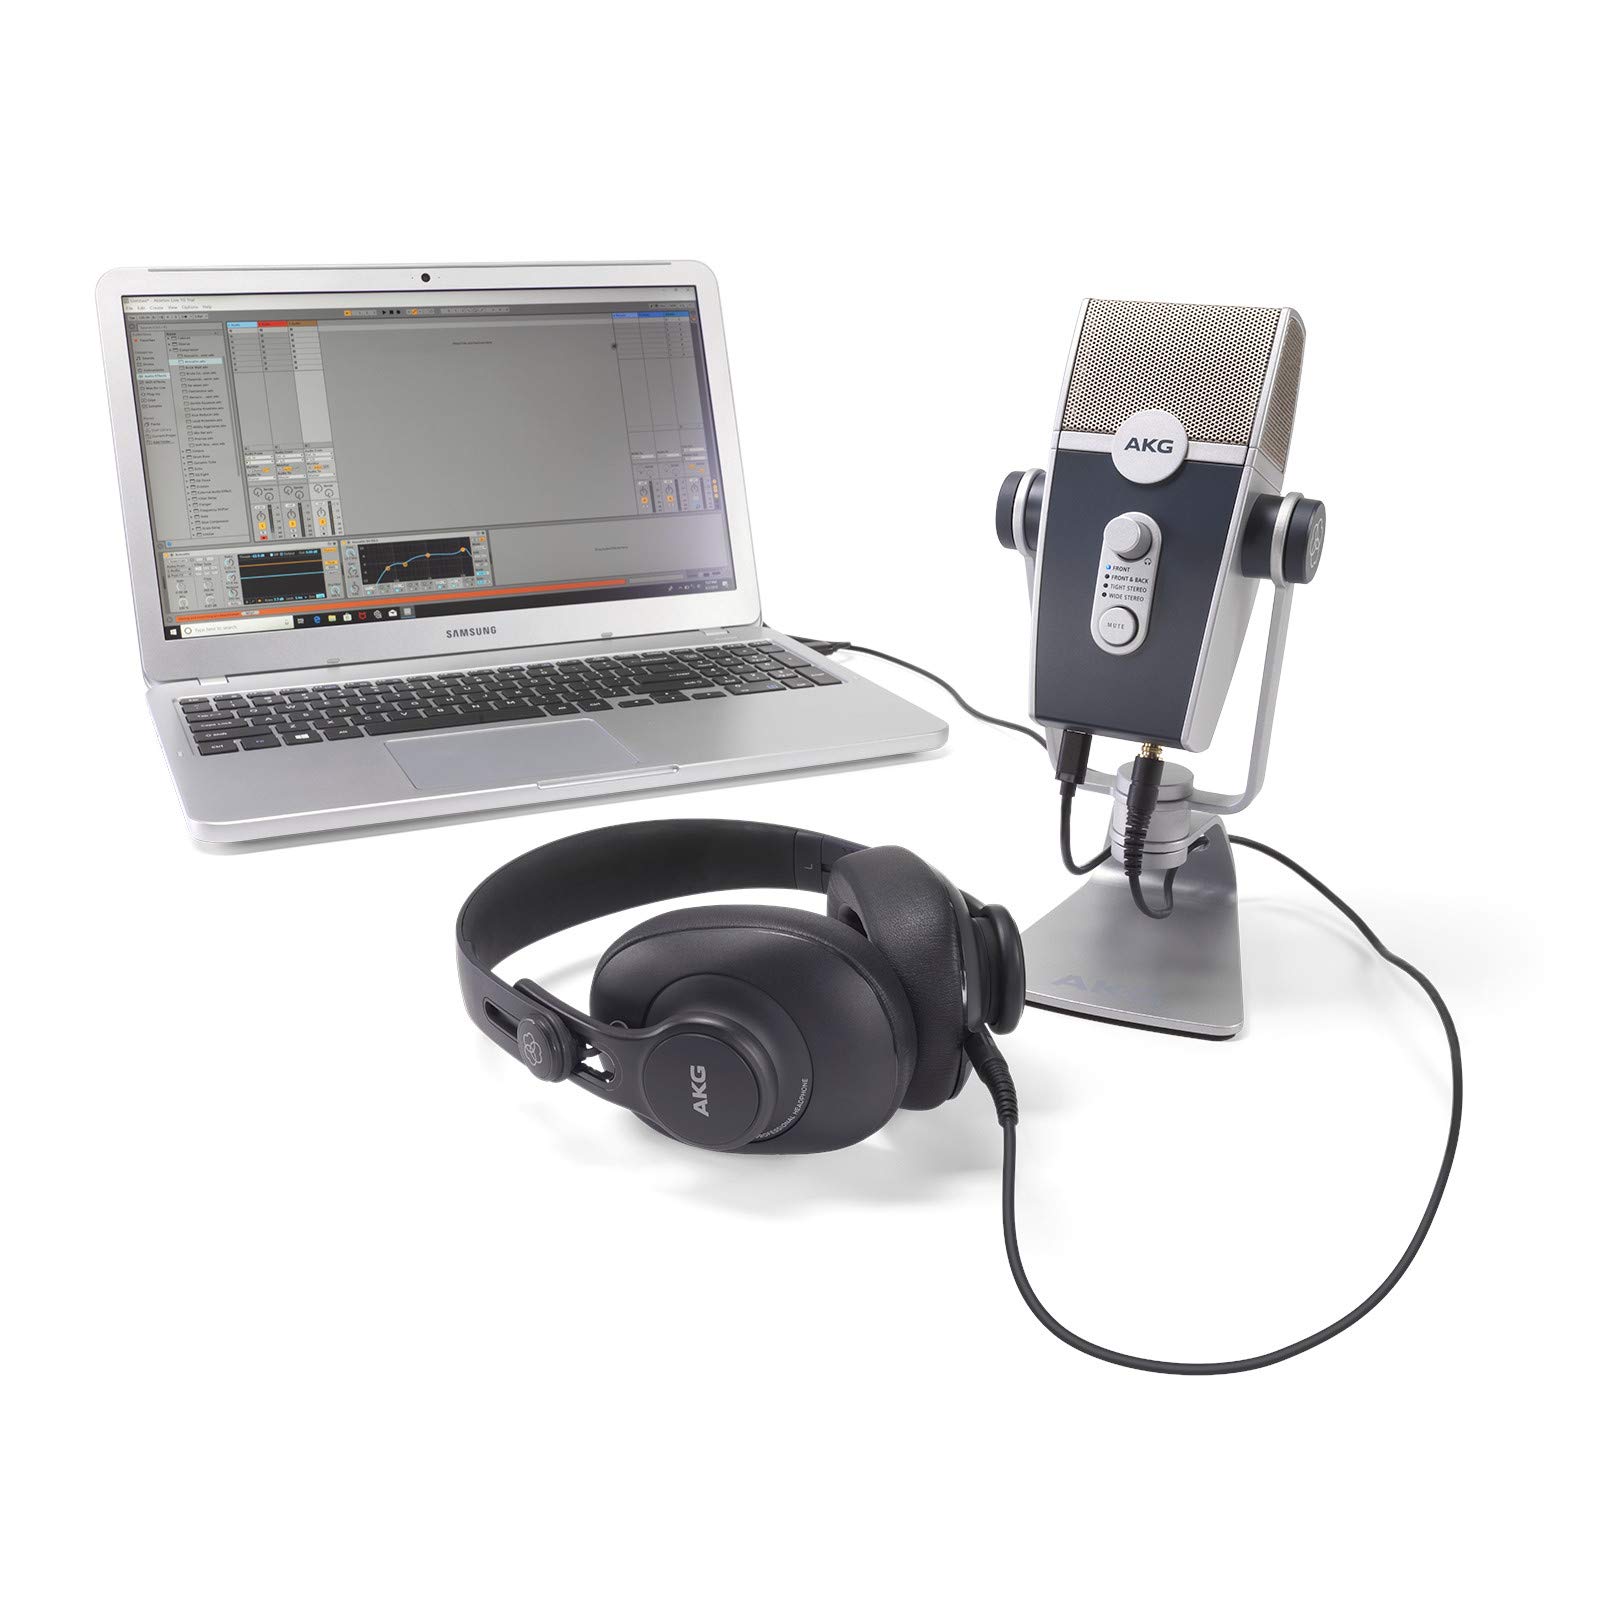 AKG Pro Audio Pro Audio Podcaster Essentials Kit for Streamers, Vloggers, and Gamers-Includes Lyra USB-C Microphone, K371 Headphones, and Ableton Lite Software